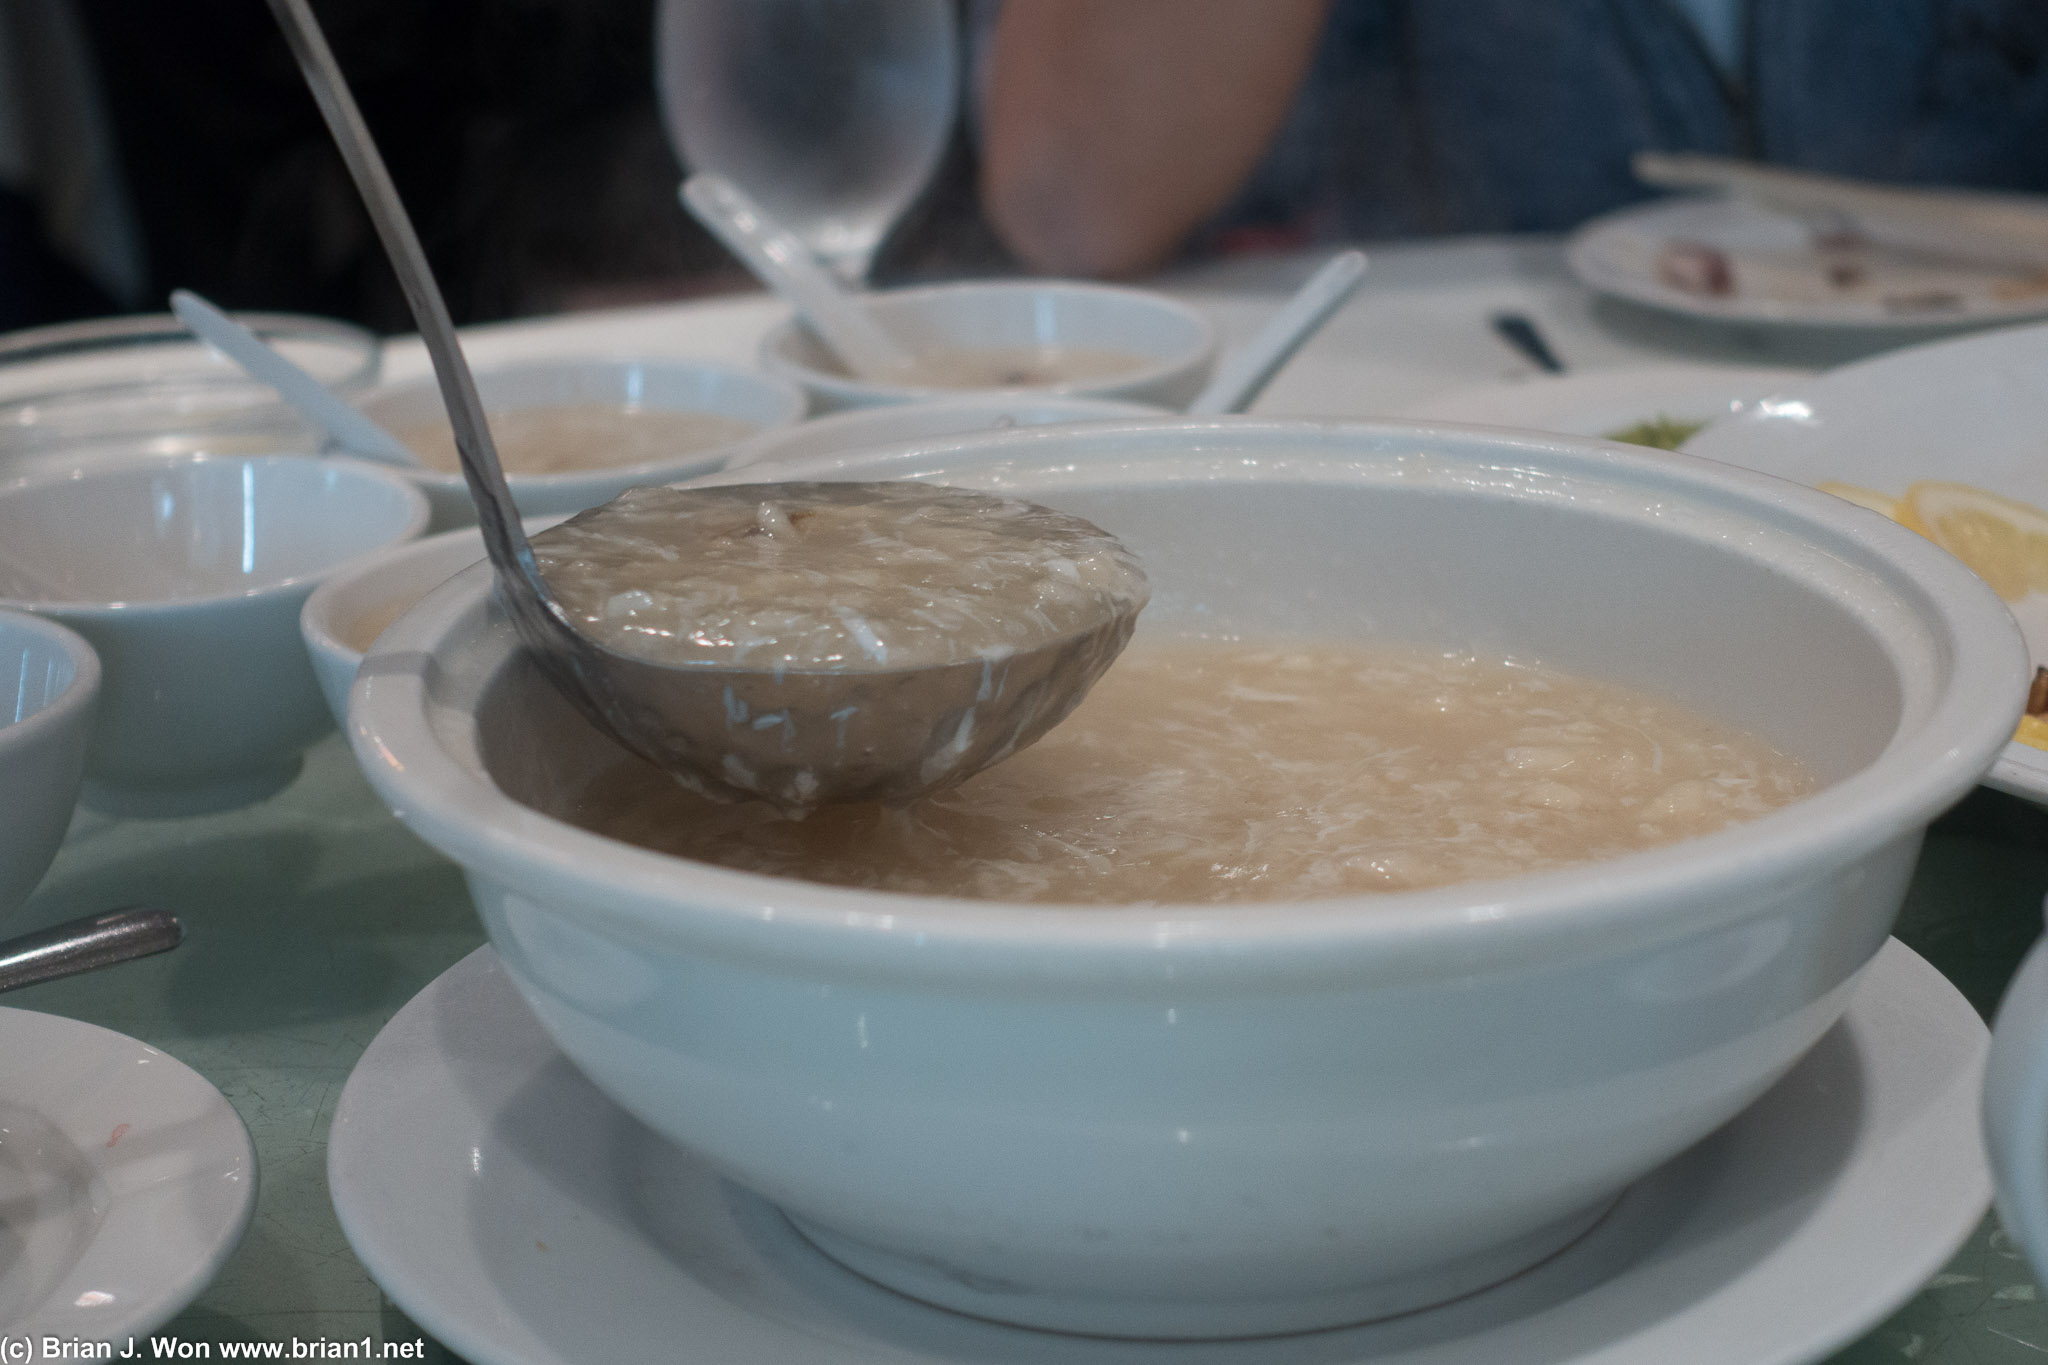 Crab meat and winter melon soup. Very soothing.